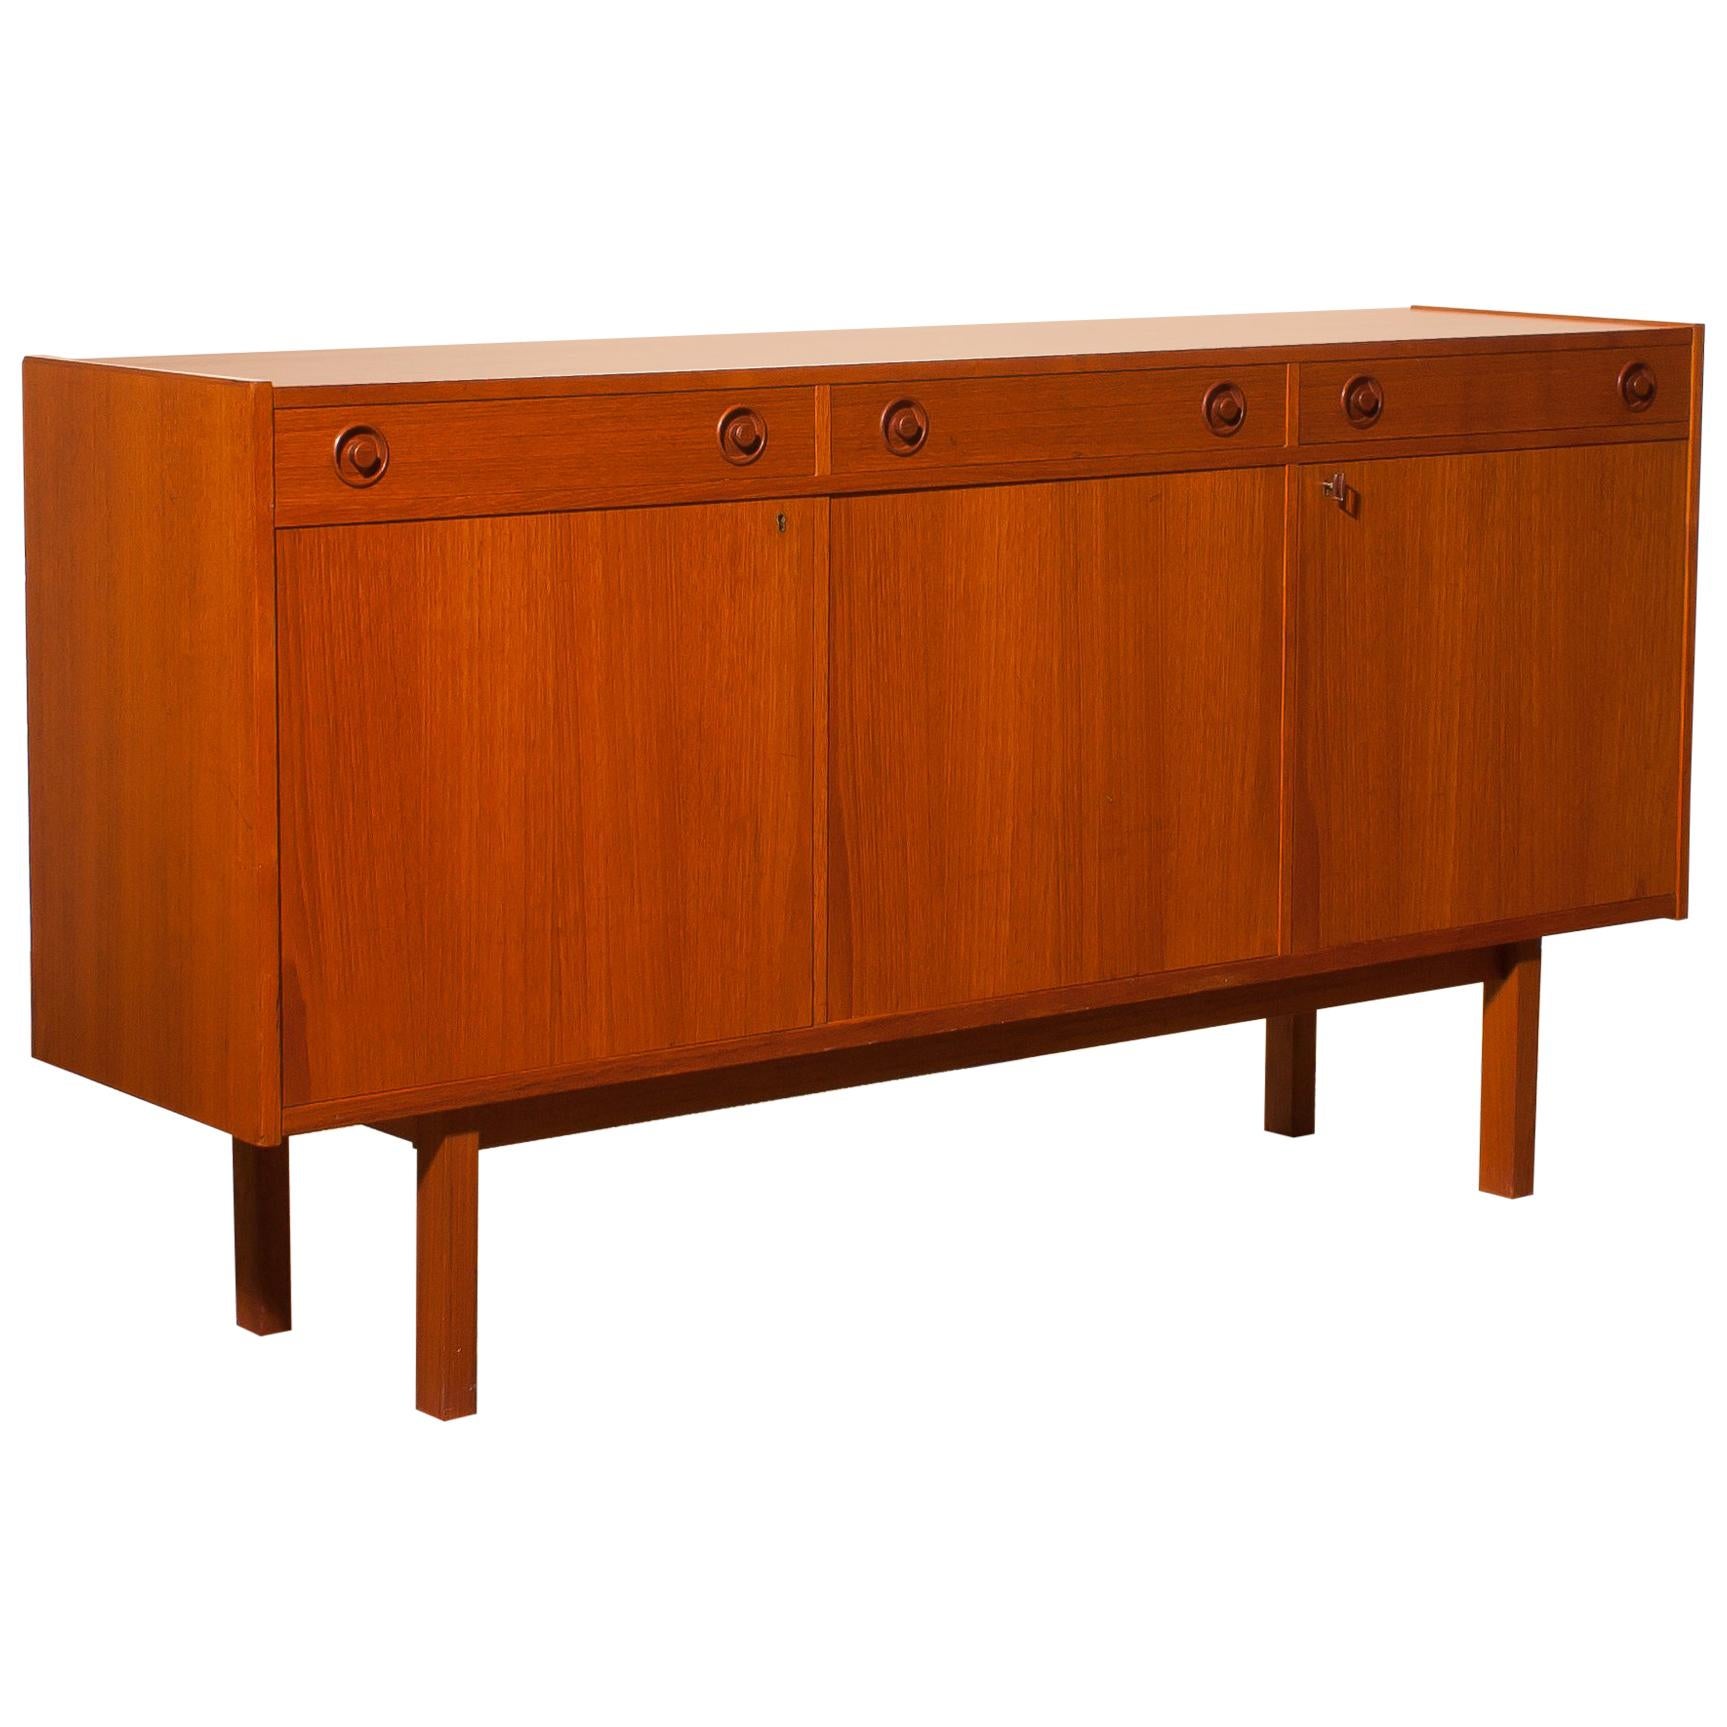 Beautiful sideboard produced by Brexo Möbler, Sweden.
This cabinet is made of teak and has three drawers and three doors.
It is in very nice condition.
Key included.
Period 1950s.
Dimensions: H 90 cm, W 170 cm, D 42 cm.